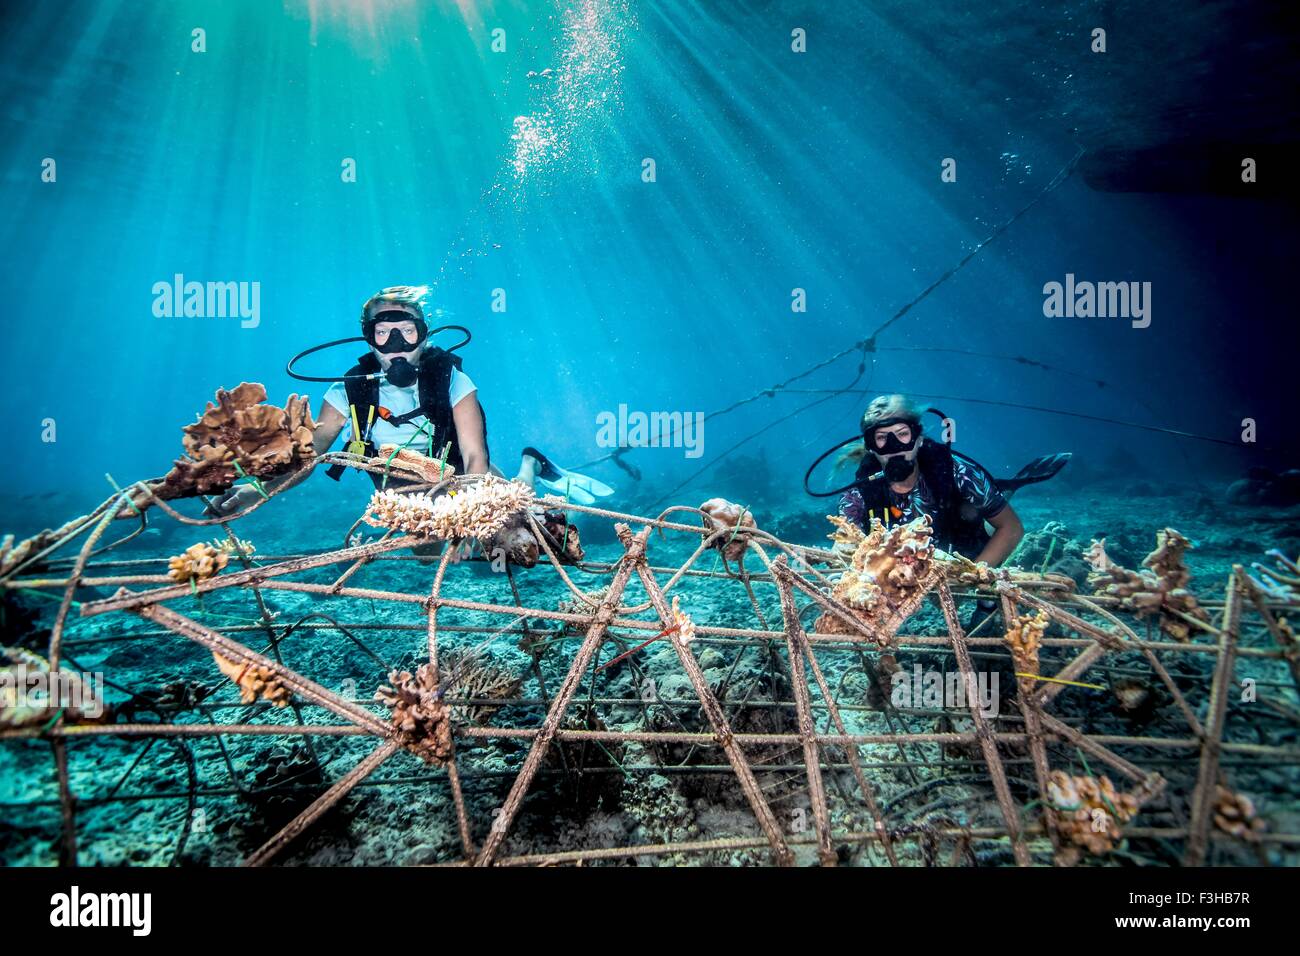 Underwater view of female divers fixing a seacrete on seabed, (artificial steel reef with electric current), Lombok, Indonesia Stock Photo